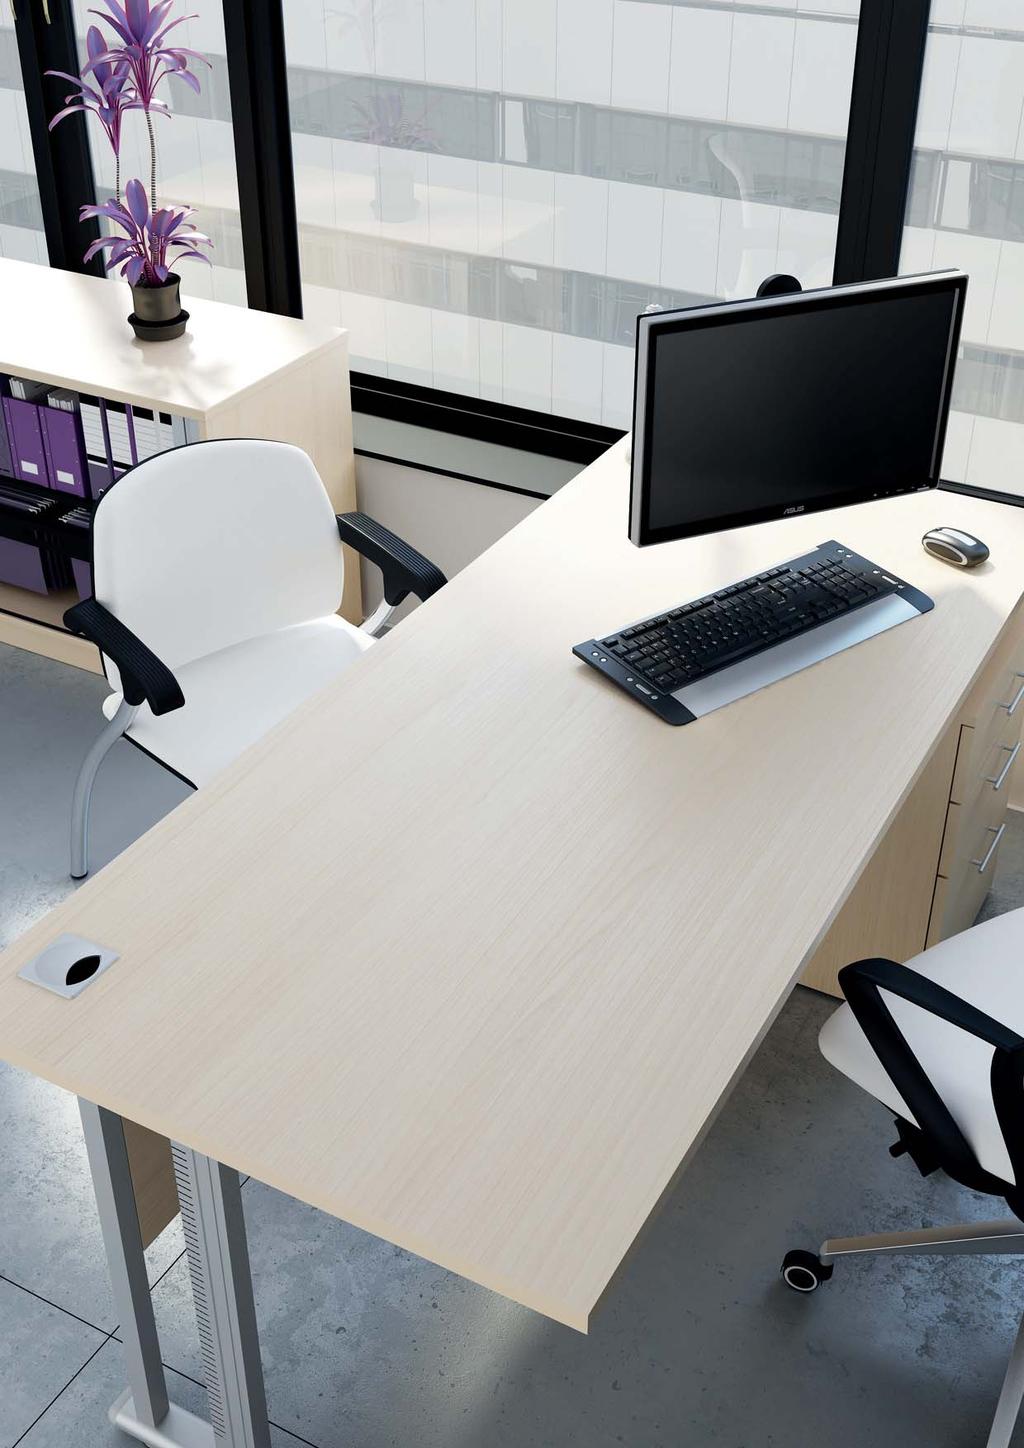 Available in depths of 800mm & 600mm and in several widths to suit all office requirements.